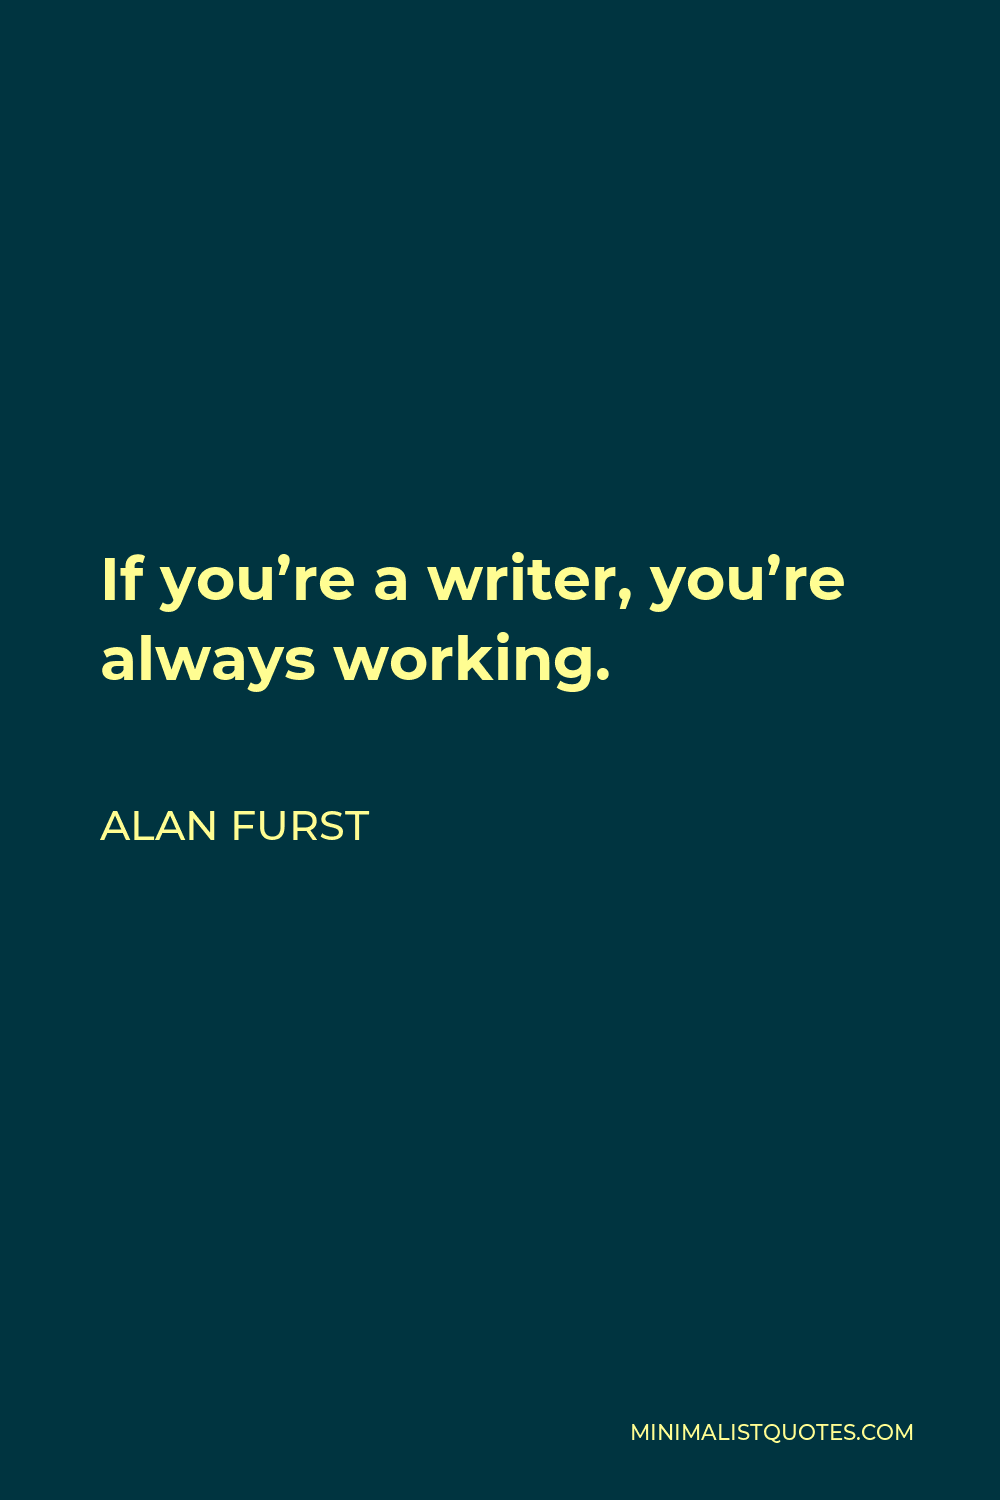 Alan Furst Quote - If you’re a writer, you’re always working.